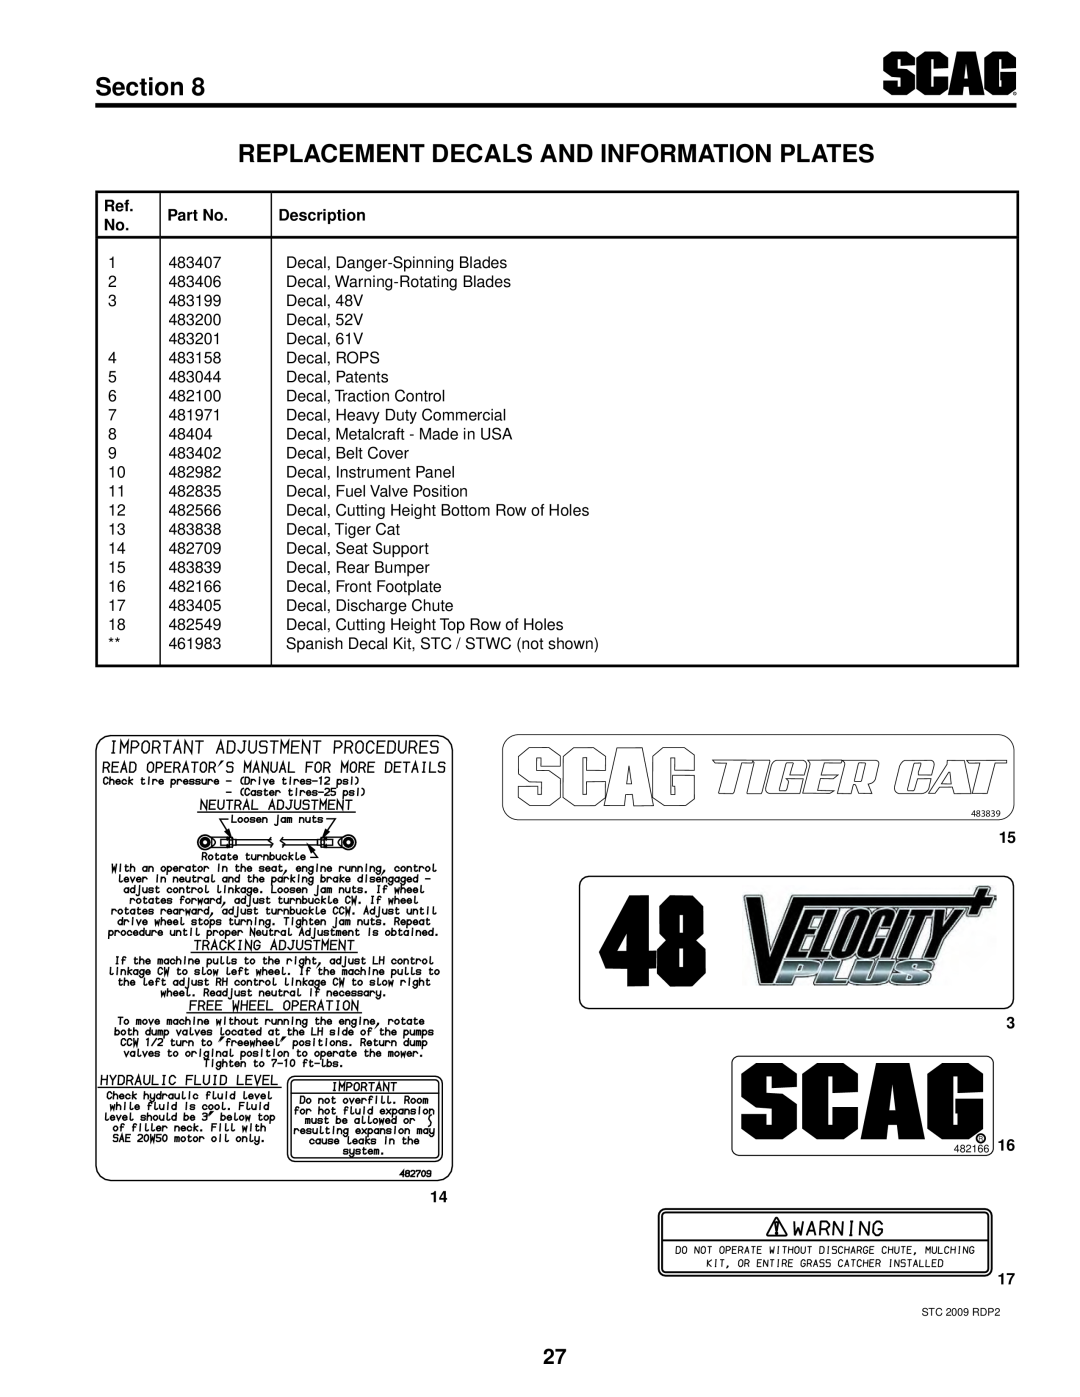 Scag Power Equipment SMWC-61V, SMWC-52V, SMTC-48V Section REPLACEMENT DECALS AND INFORMATION PLATES, 482166R, STC 2009 RDP2 